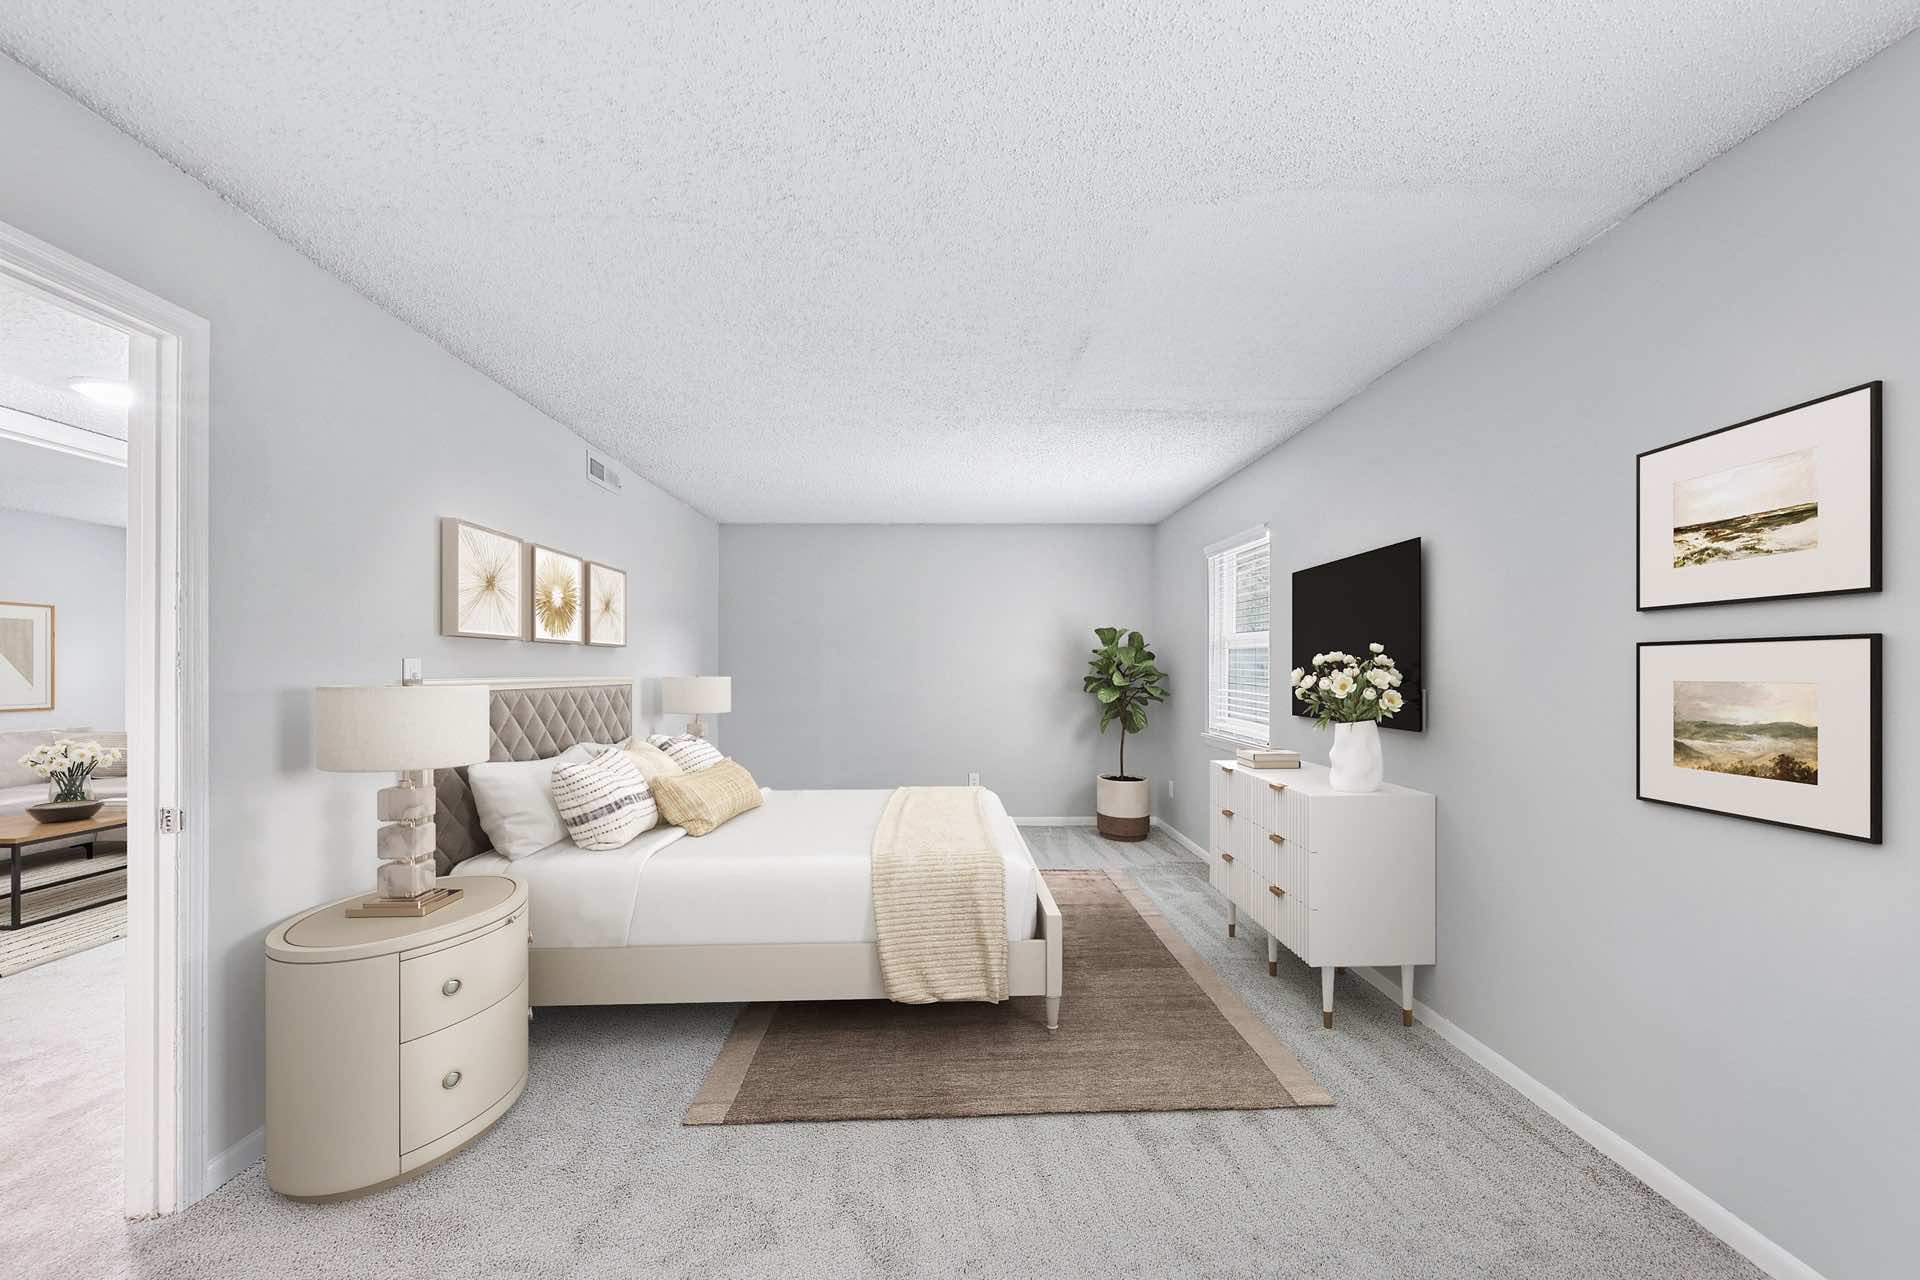 bedroom with natural lighting and plush carpeting